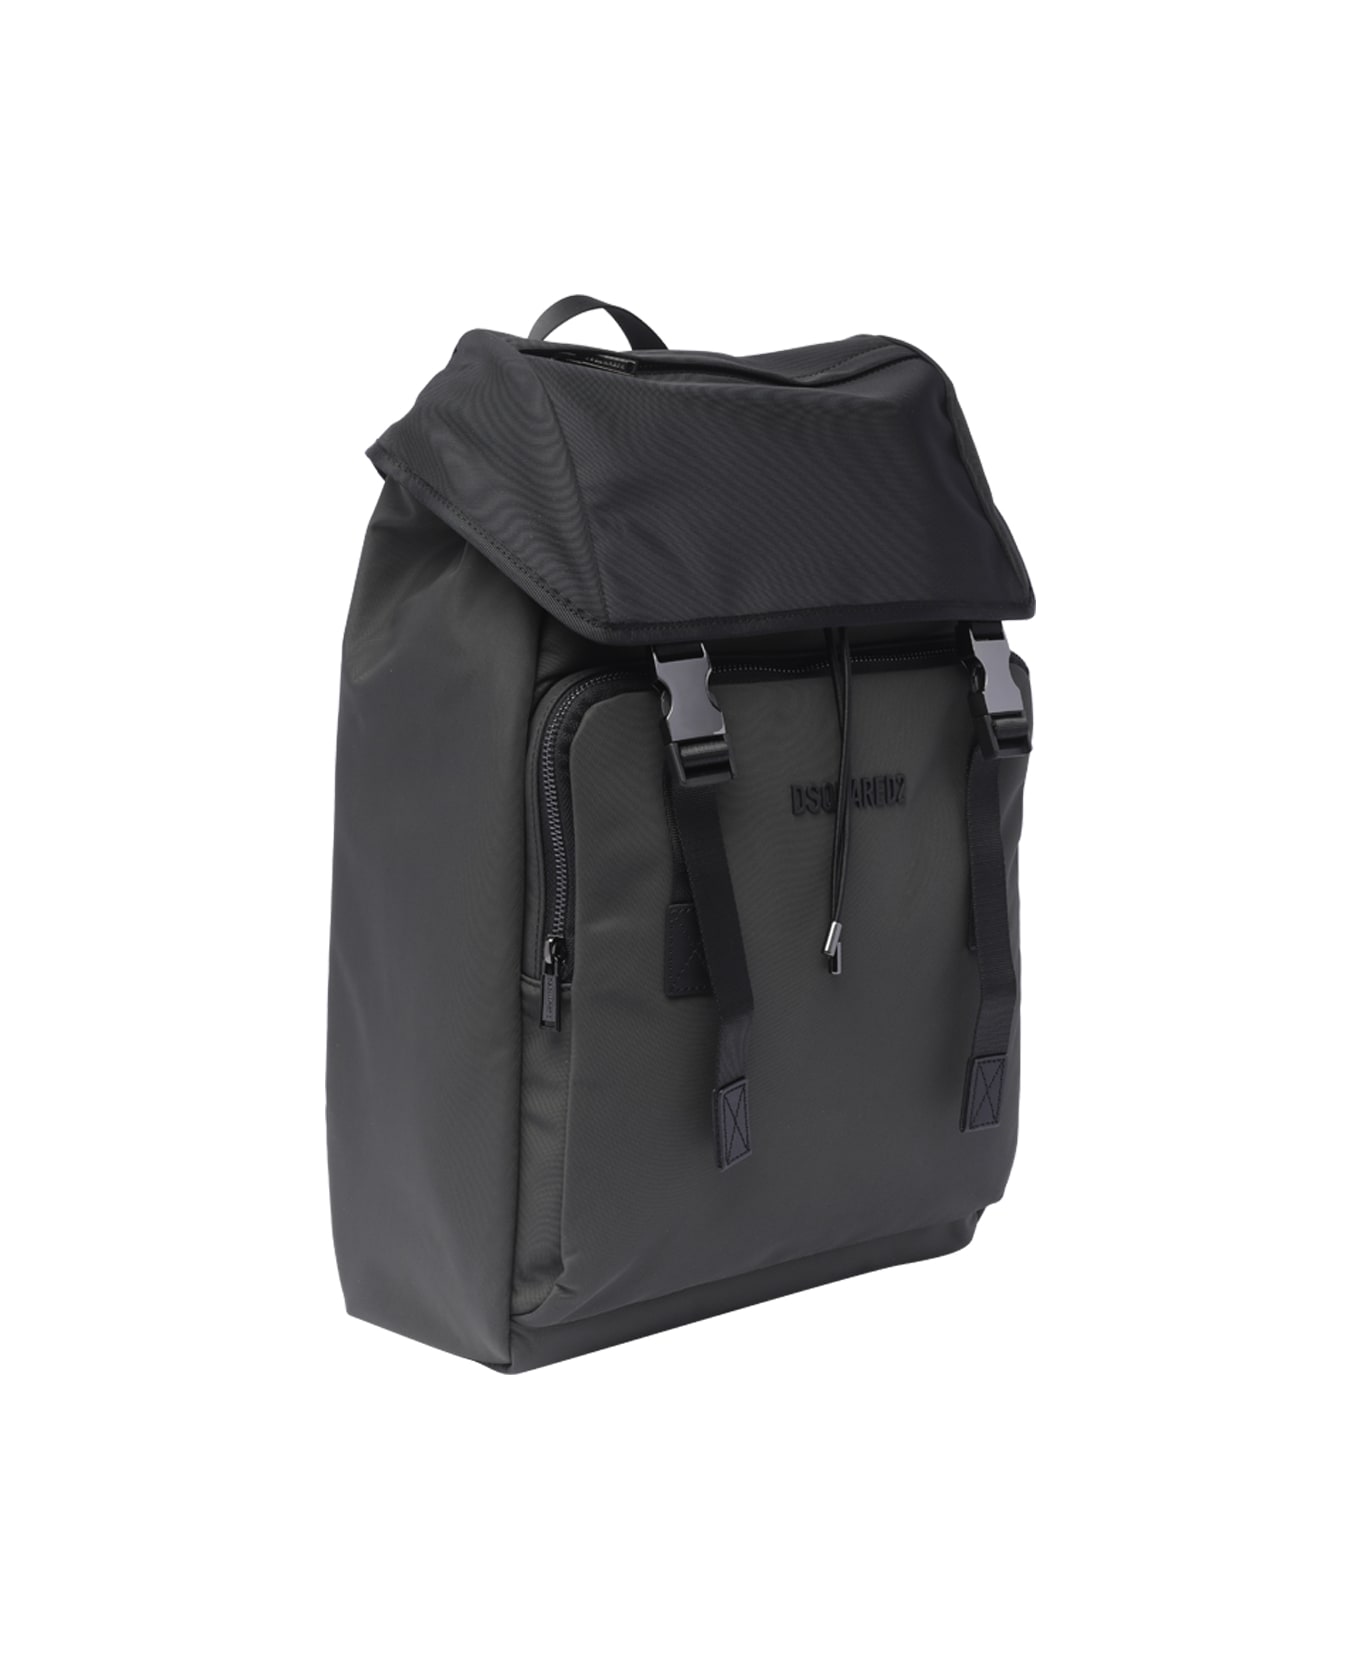 Dsquared2 Backpack With Logo - Grigio Scuro/nero バックパック